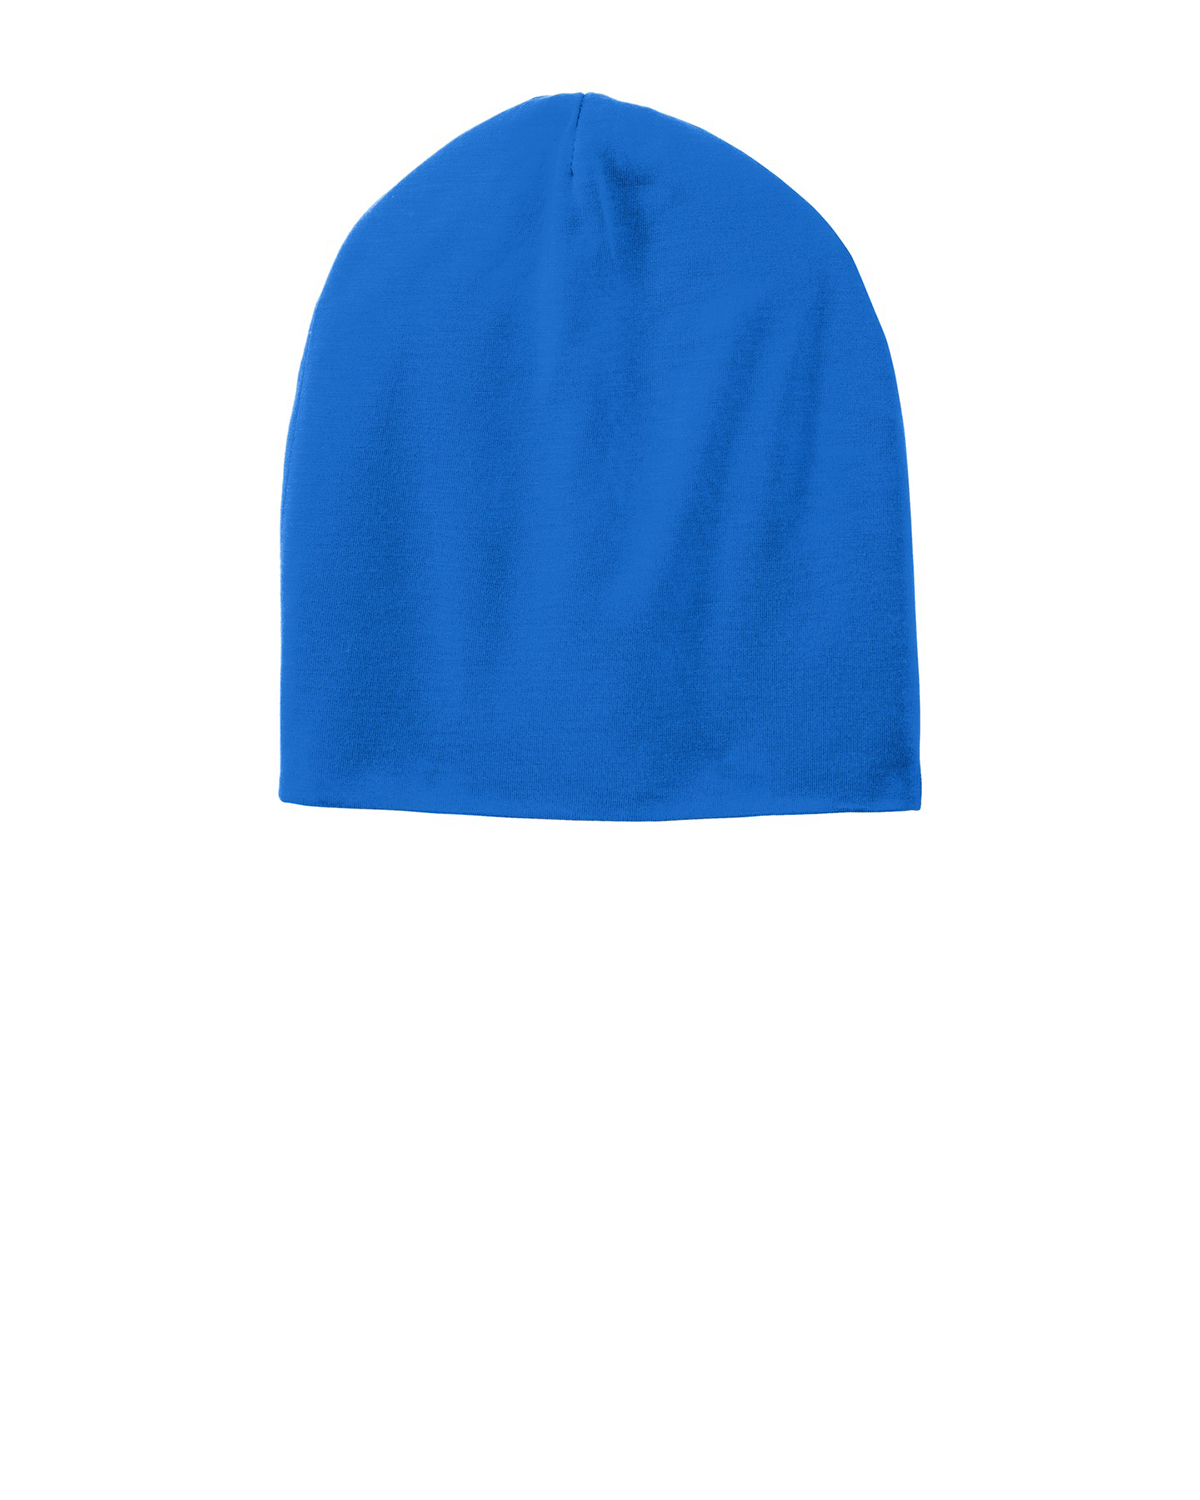 'Sport-Tek STC35 PosiCharge Competitor Cotton Touch Slouch Beanie'